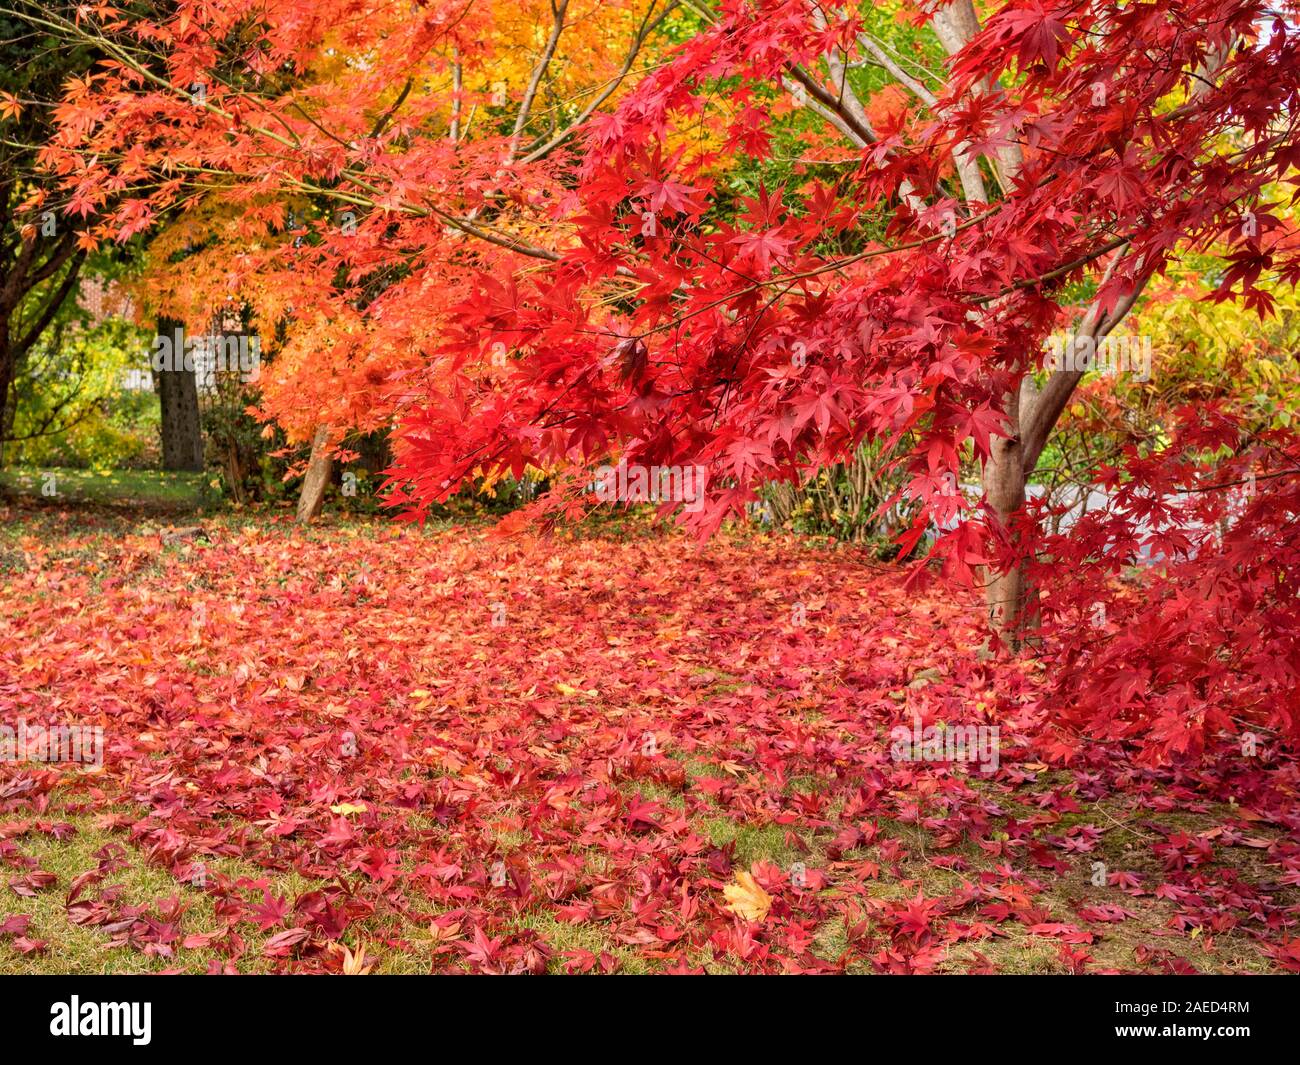 Colorful bright gold yellow orange and red Japanese maple leaves on trees (Acer palmatum) and scattered on the grass on an autumn day. Chappaqua, West Stock Photo